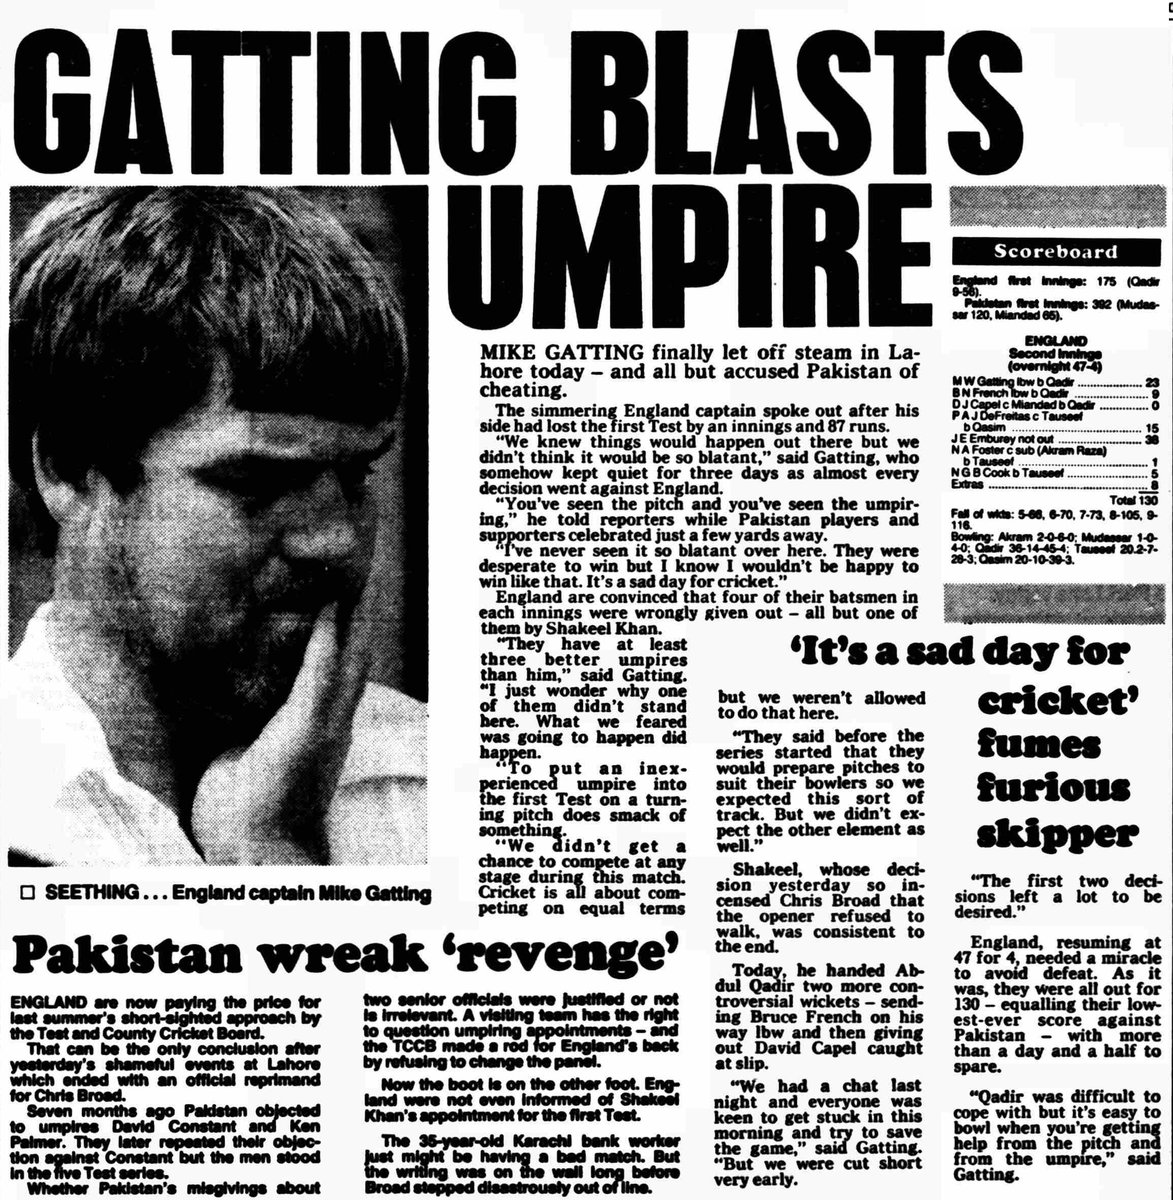 Had the England management have taken a harder line with their captain and them team then a lid might - only might - have been kept on things. But they failed and the fuse was lit for what happened in Faisalabad. Gatting's comments hardly helped calm an already tense situation